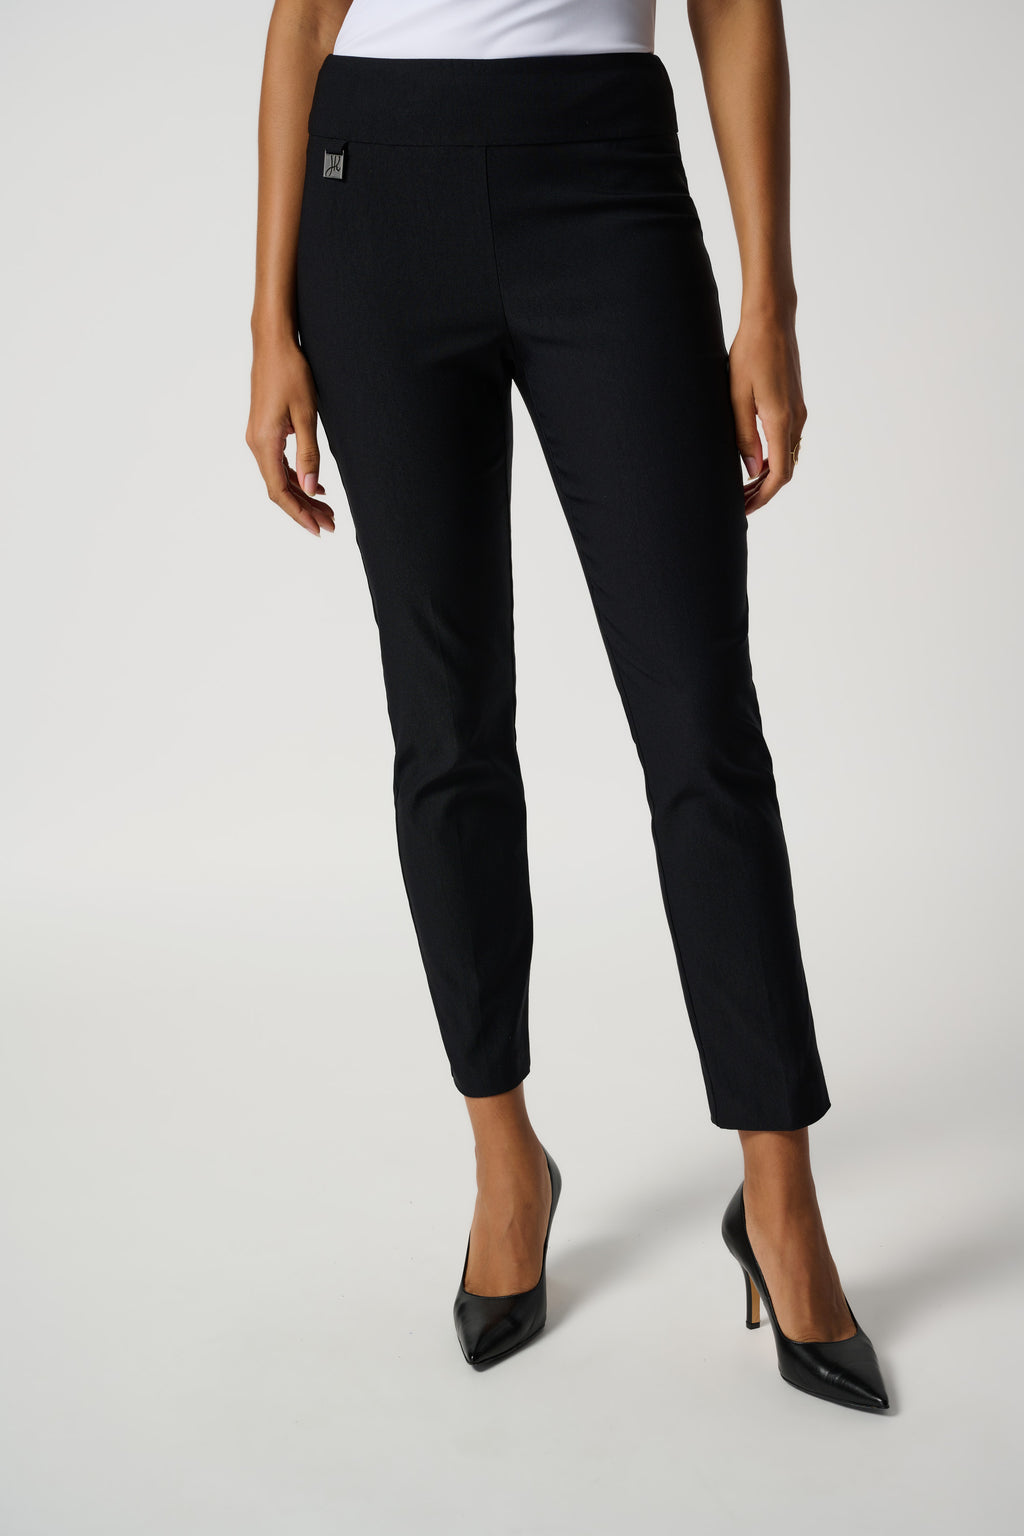 These black Joseph Ribkoff slim-fit pull-on trouser, constructed in a woven Millennium fabric, provide just the right amount of weight and stretch for a form-flattering fit. Also feature a structured contour waistband and a subtle JR tab ornament on the front so you can feel comfortable and confident wherever the day takes you.